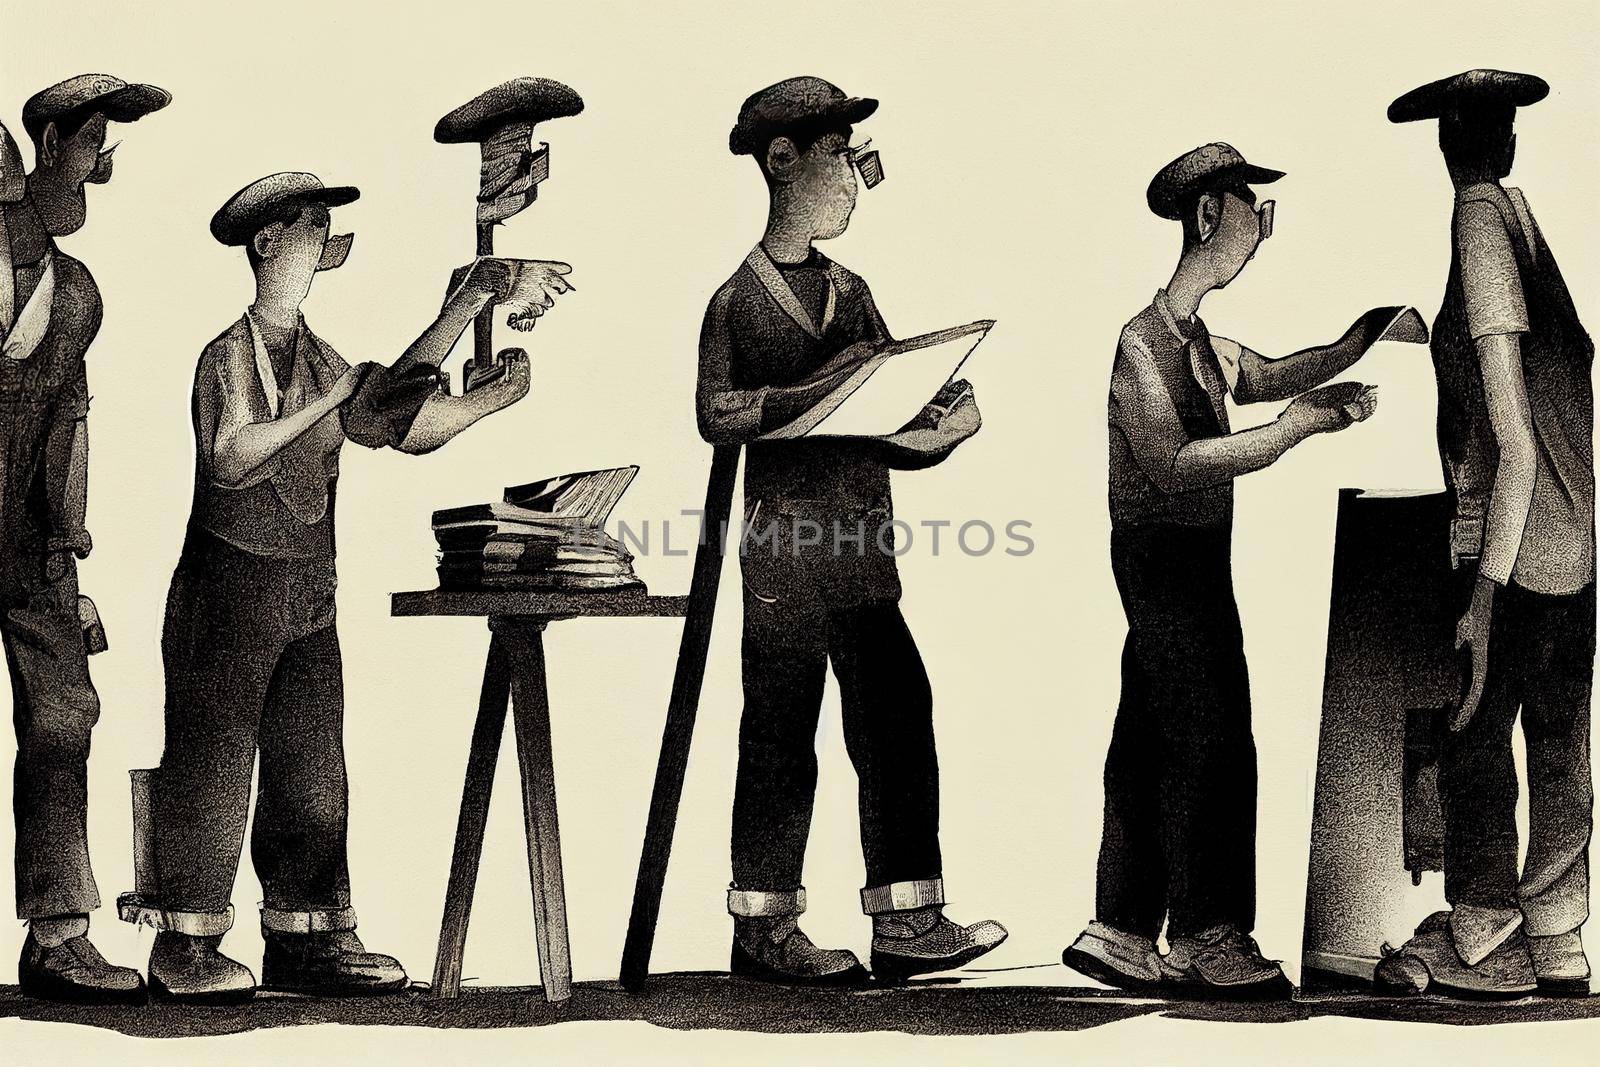 Bindery Workers ,Toon illustration by 2ragon